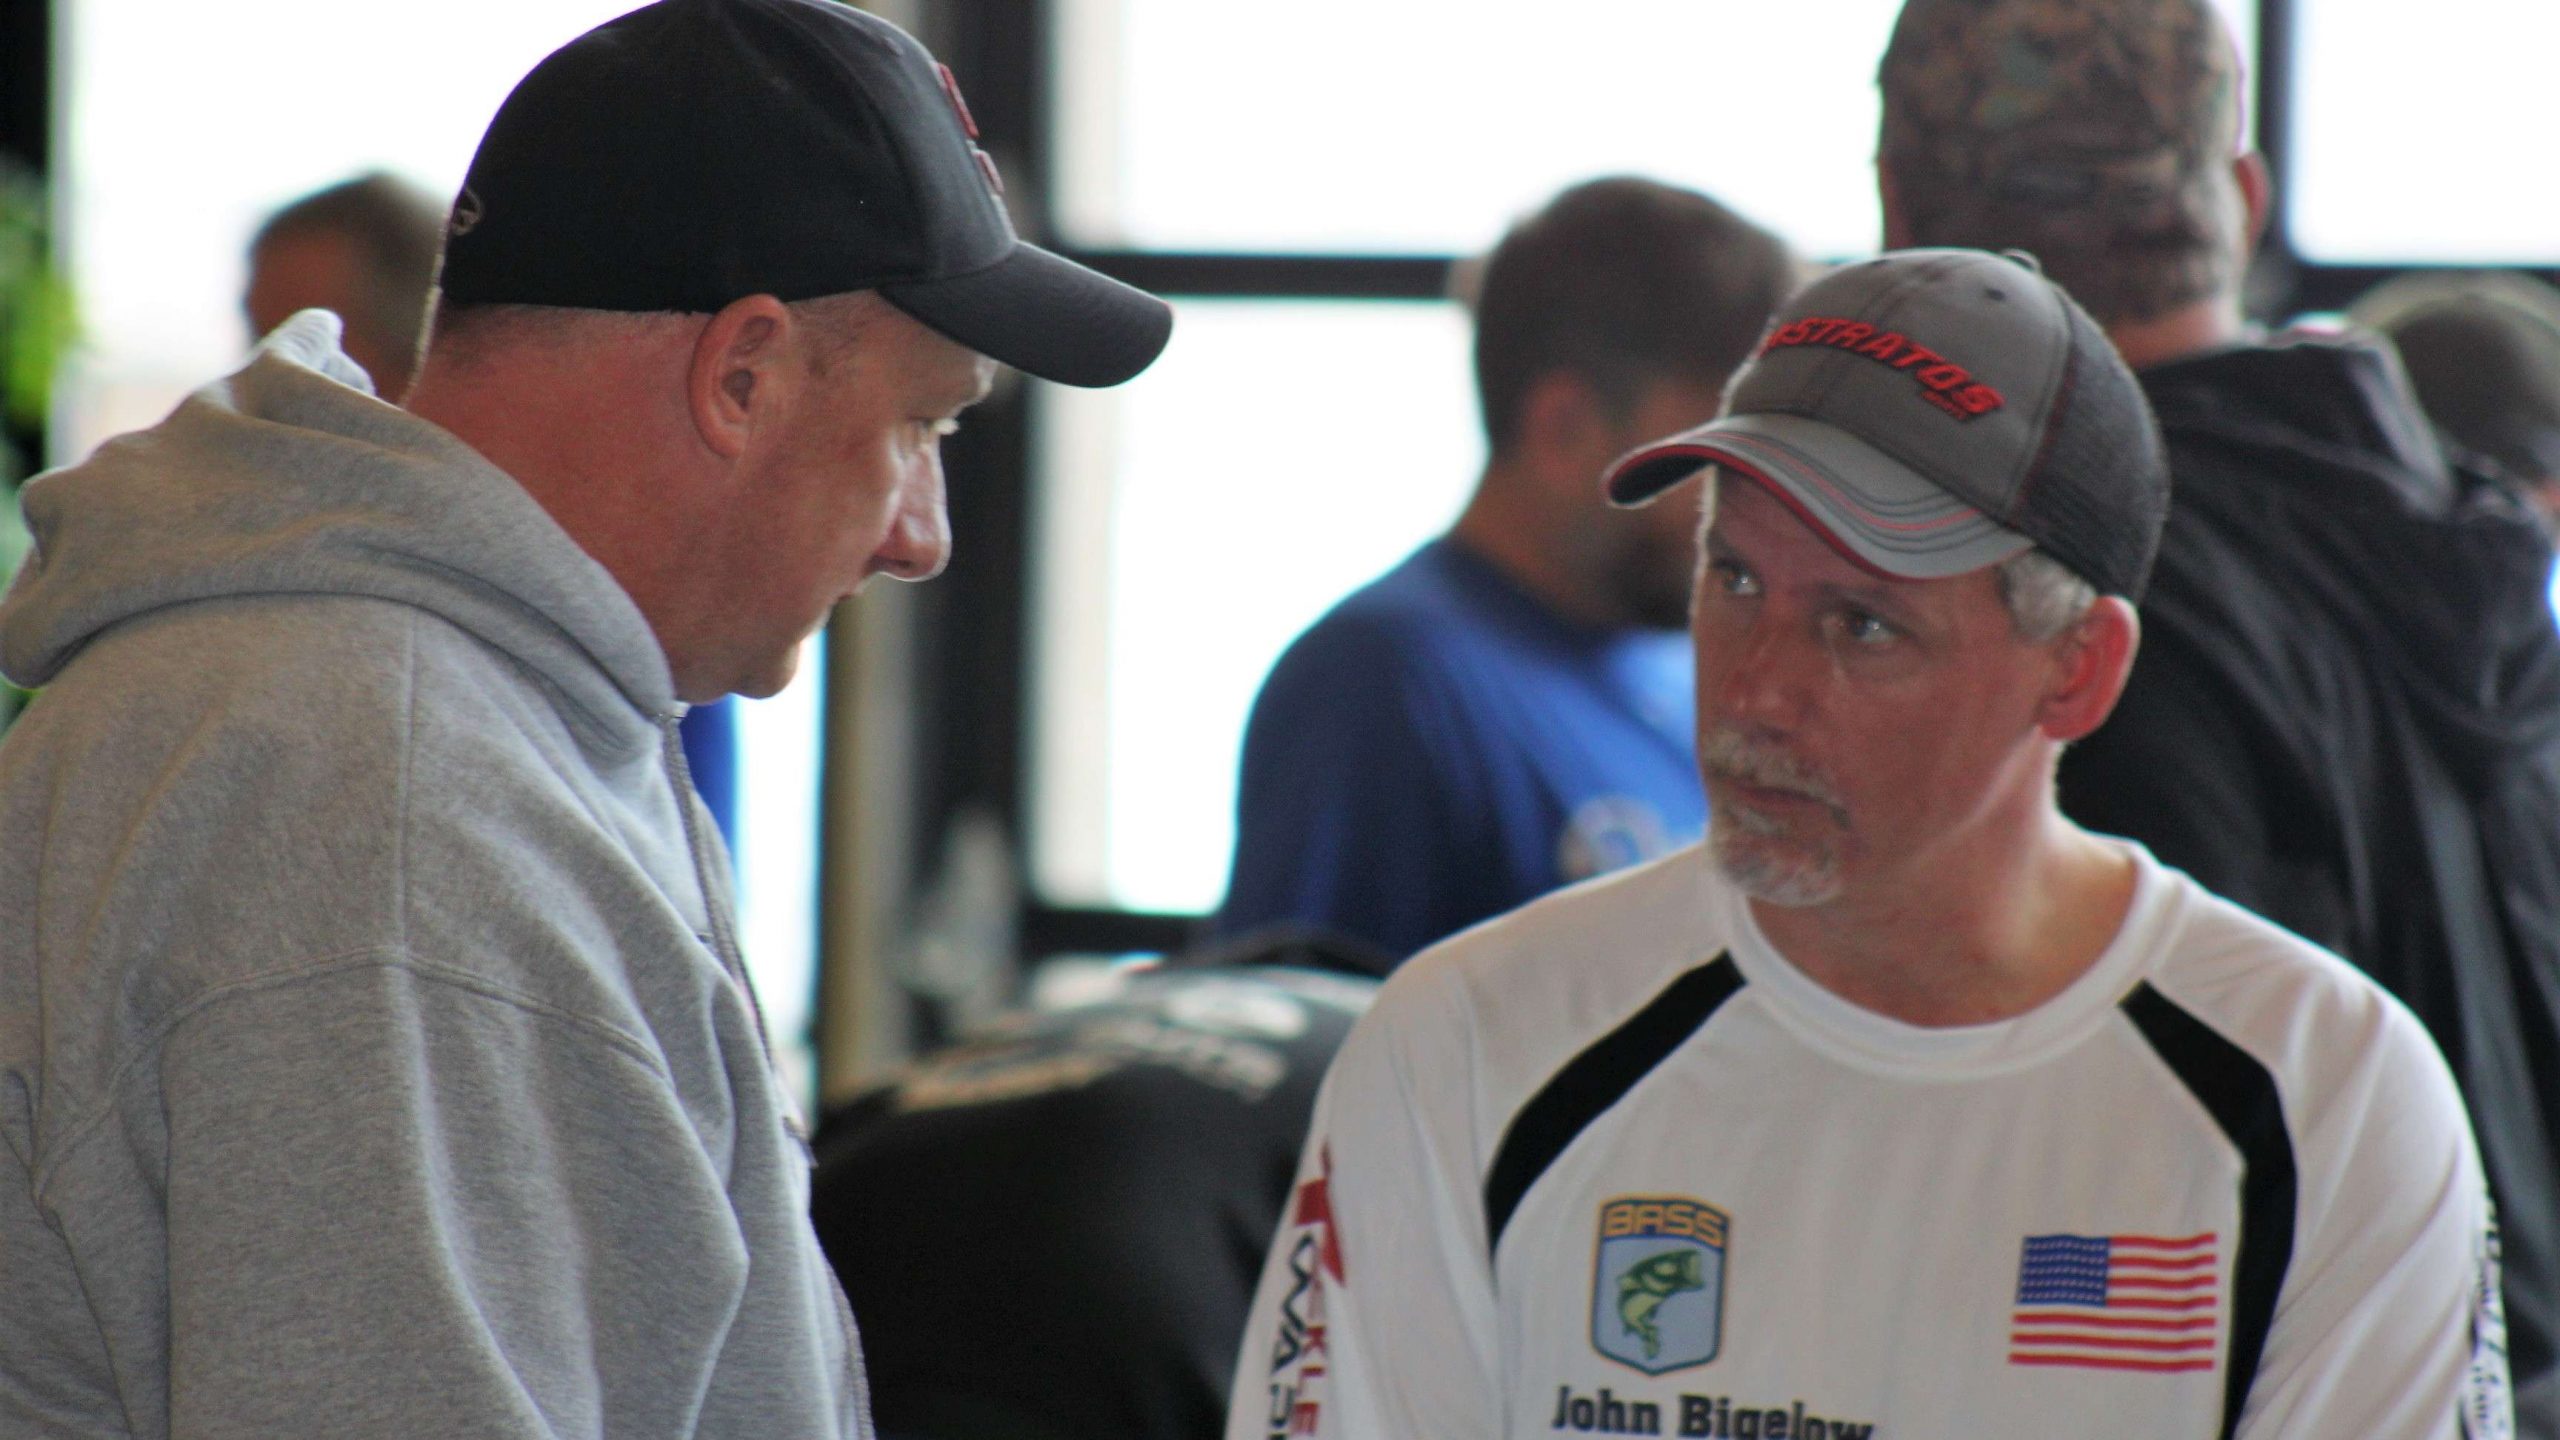 For every high school angler, there is a coach, a parent, or mentor helping in the wings. Here, two such fellows chat during registration Saturday at Camden on the Lake Resort.